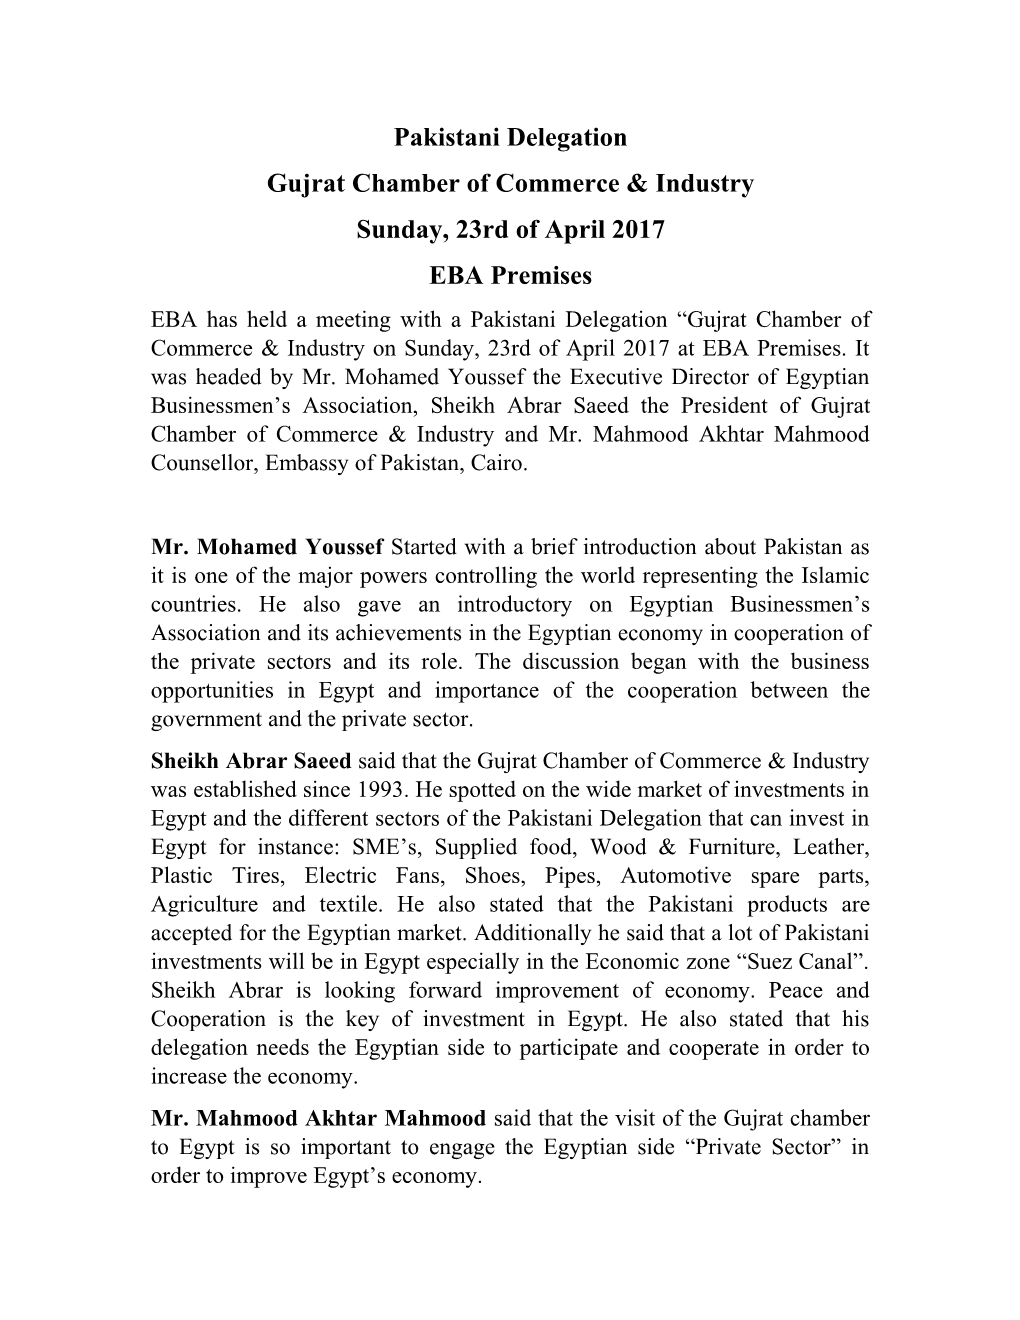 Gujrat Chamber of Commerce & Industry